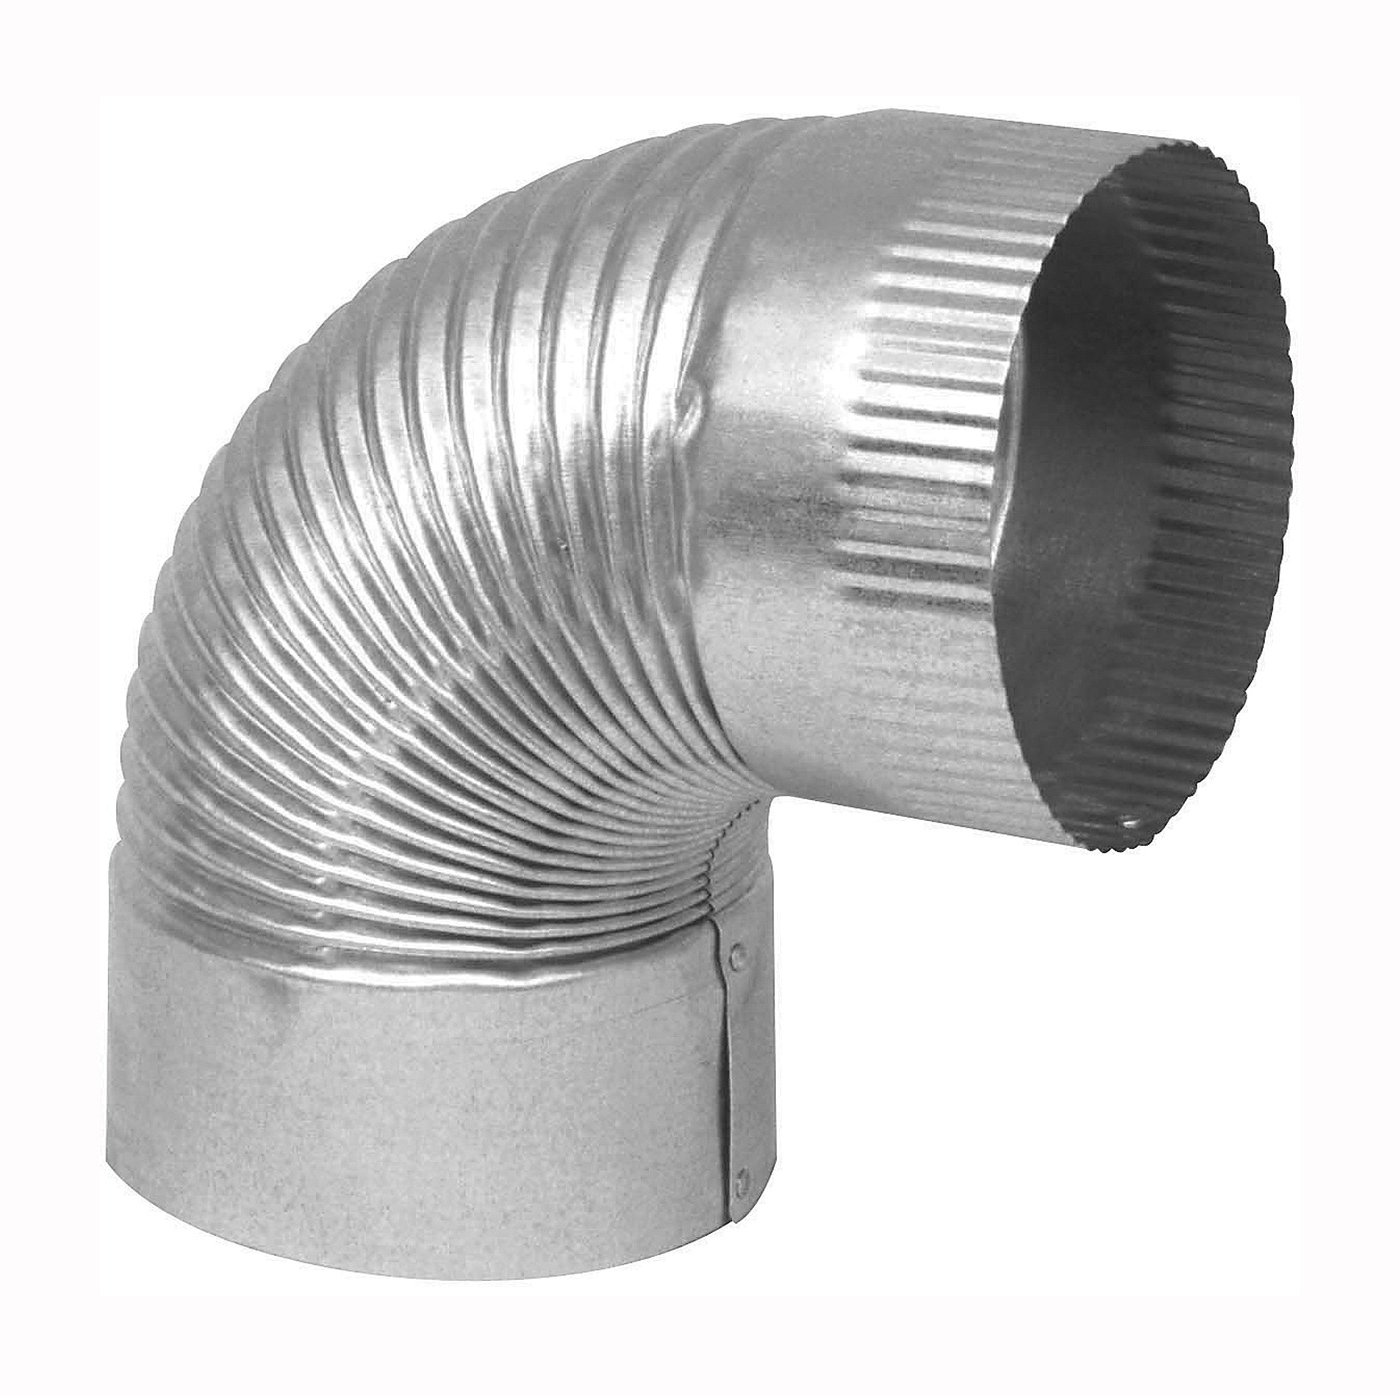 GV0323 Corrugated Elbow, 4 in Connection, 30 Gauge, Galvanized